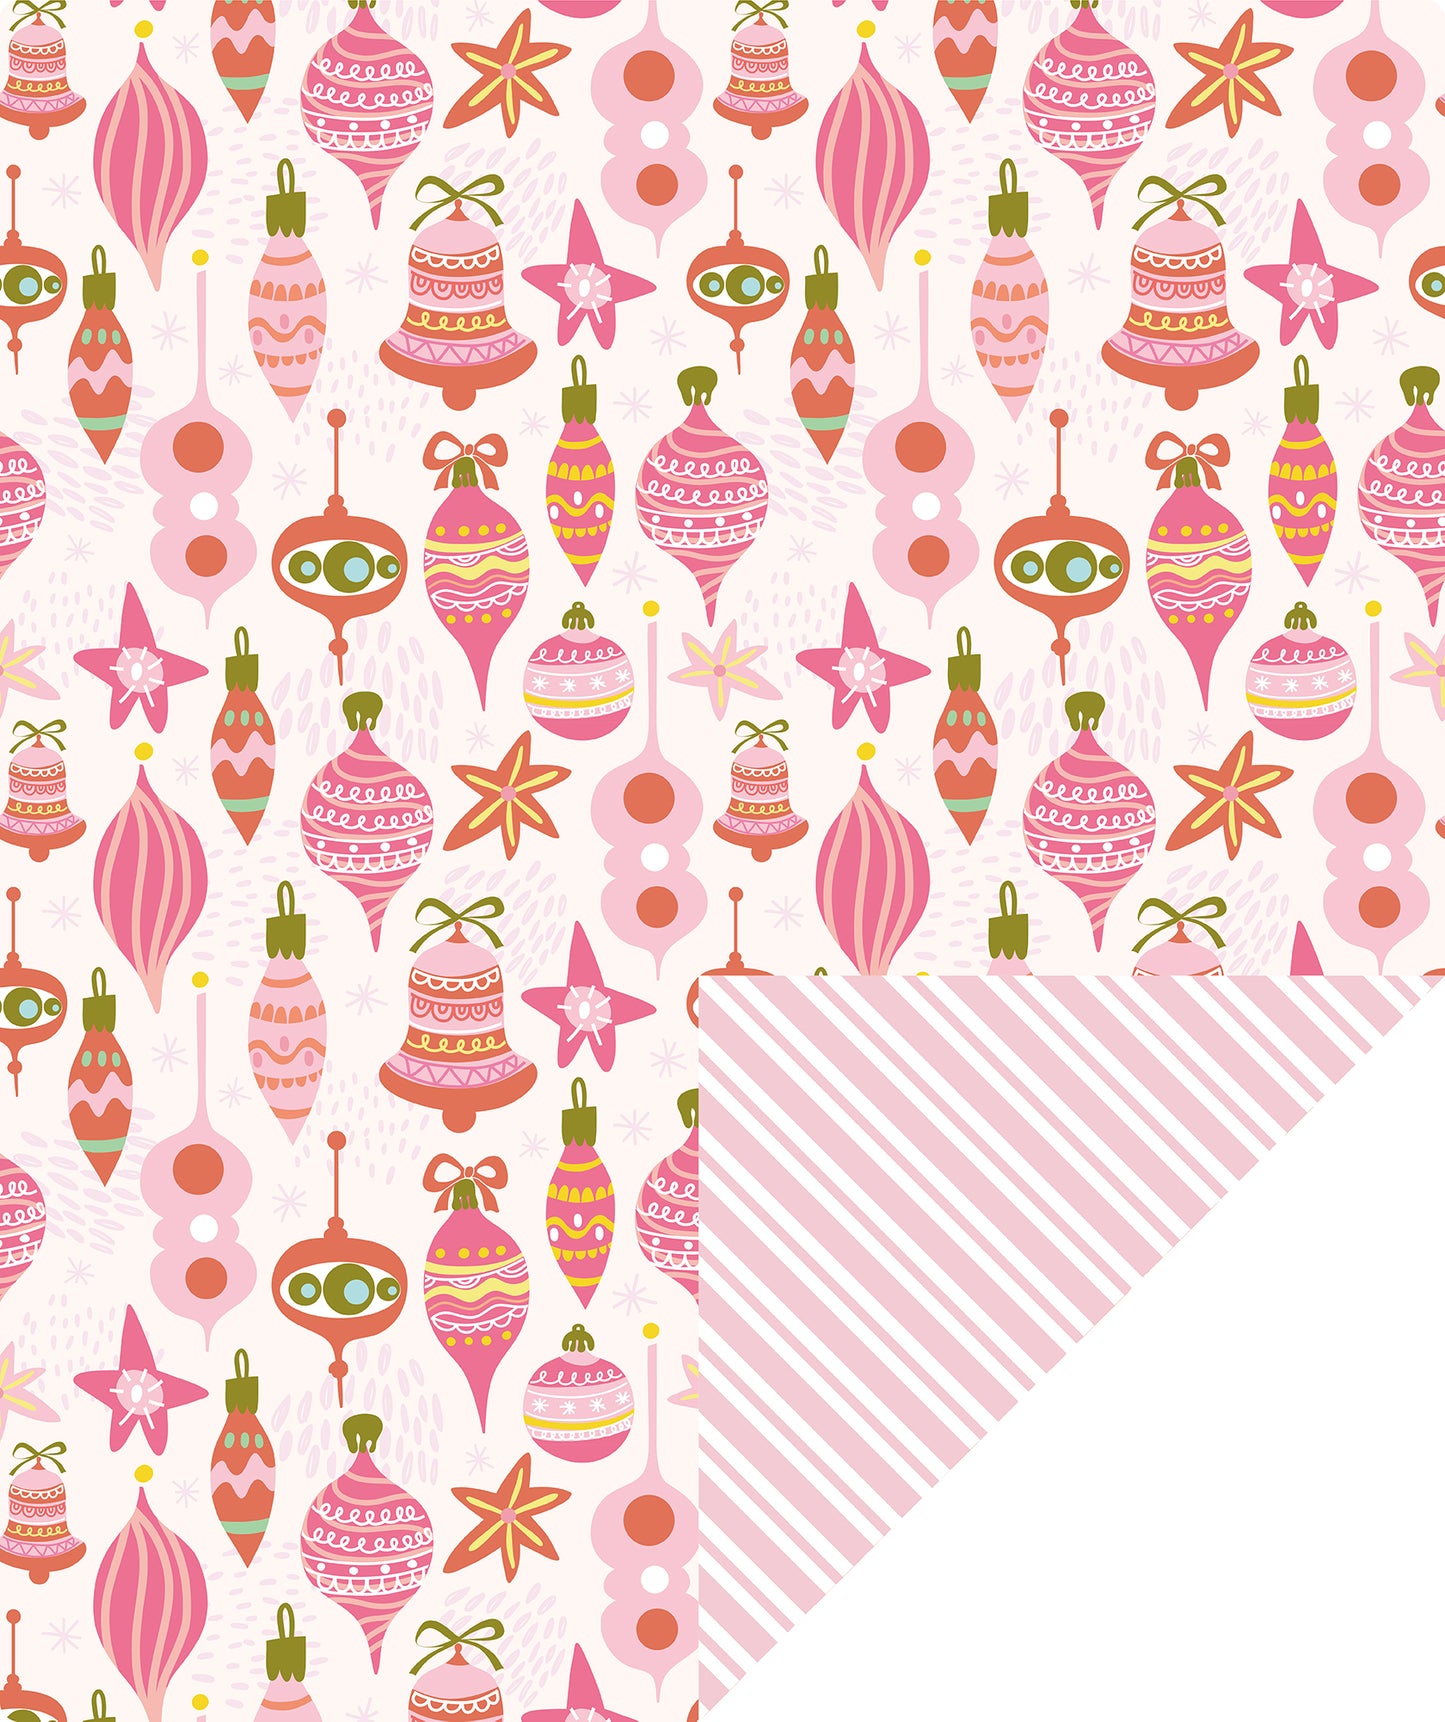 Christmas Ornament Wrapping Paper Roll with Pink Diagonal Stripes on Reverse Wholesale Wrapholic